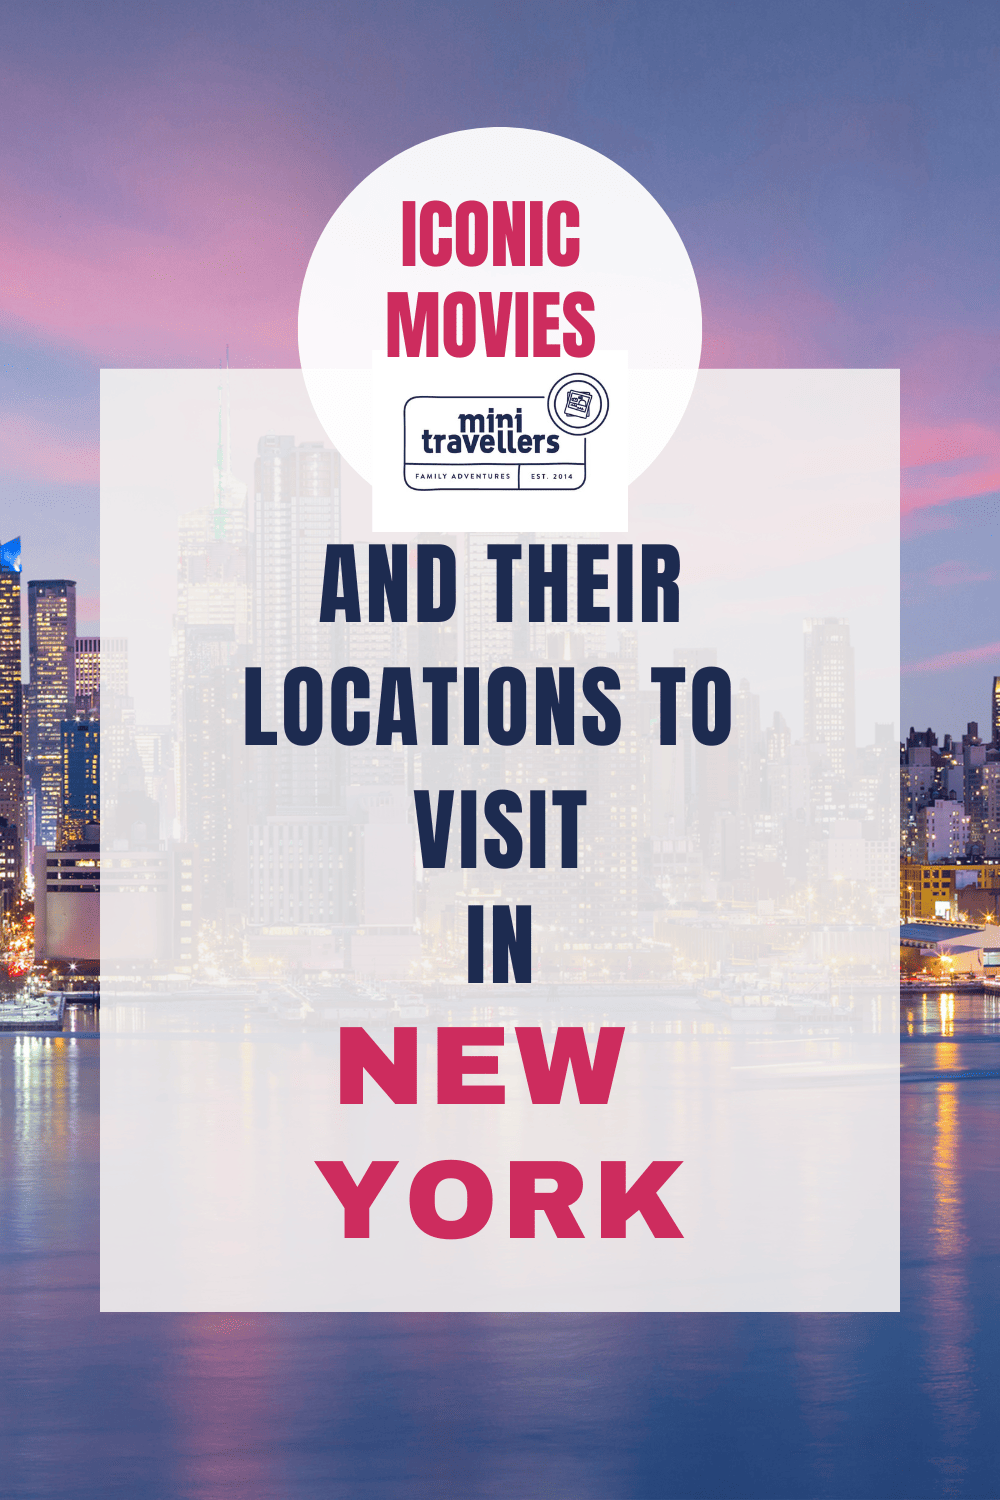 Iconic Movies and their Locations to visit in New York